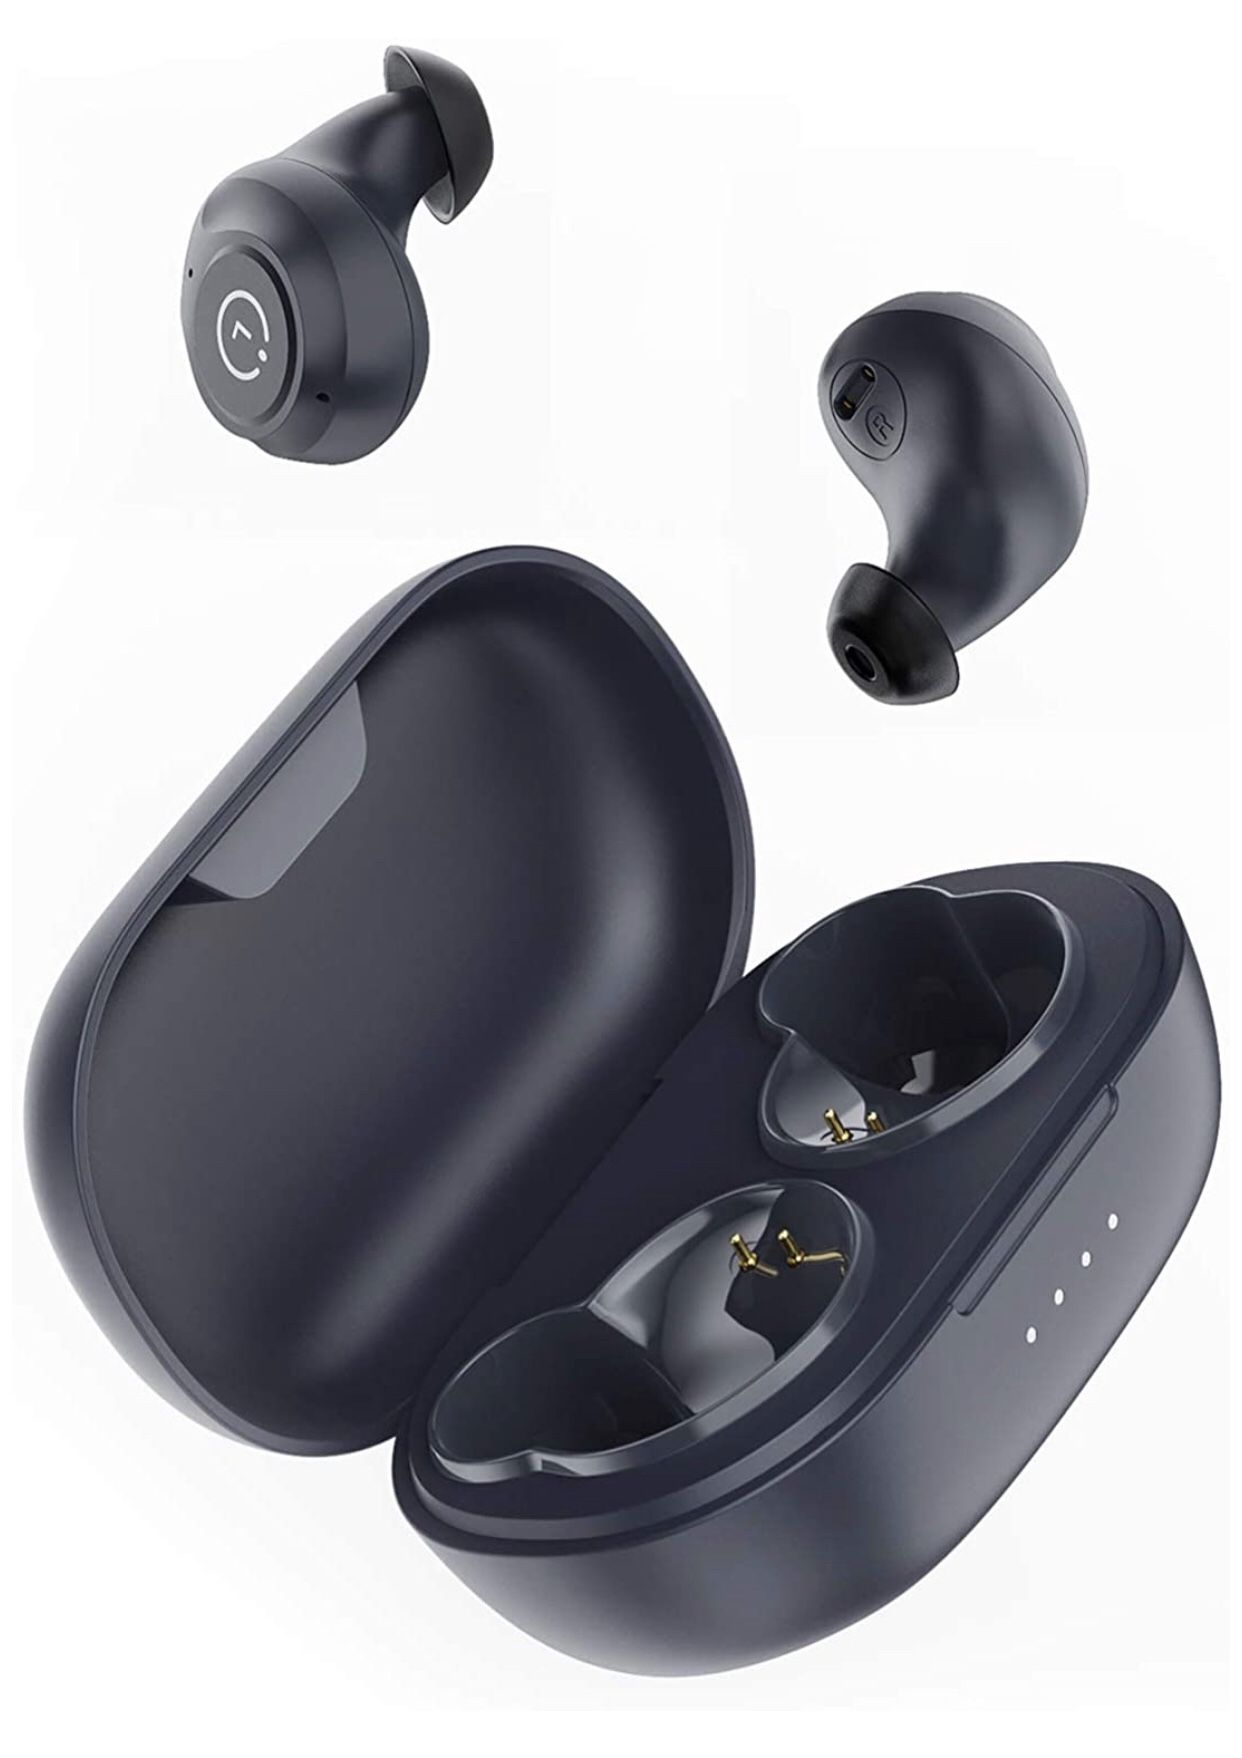 E60 Bluetooth Wireless Earbuds with Wireless Charging Case, 8H Continuous Playtime, IPX8 Waterproof Bluetooth Earbuds